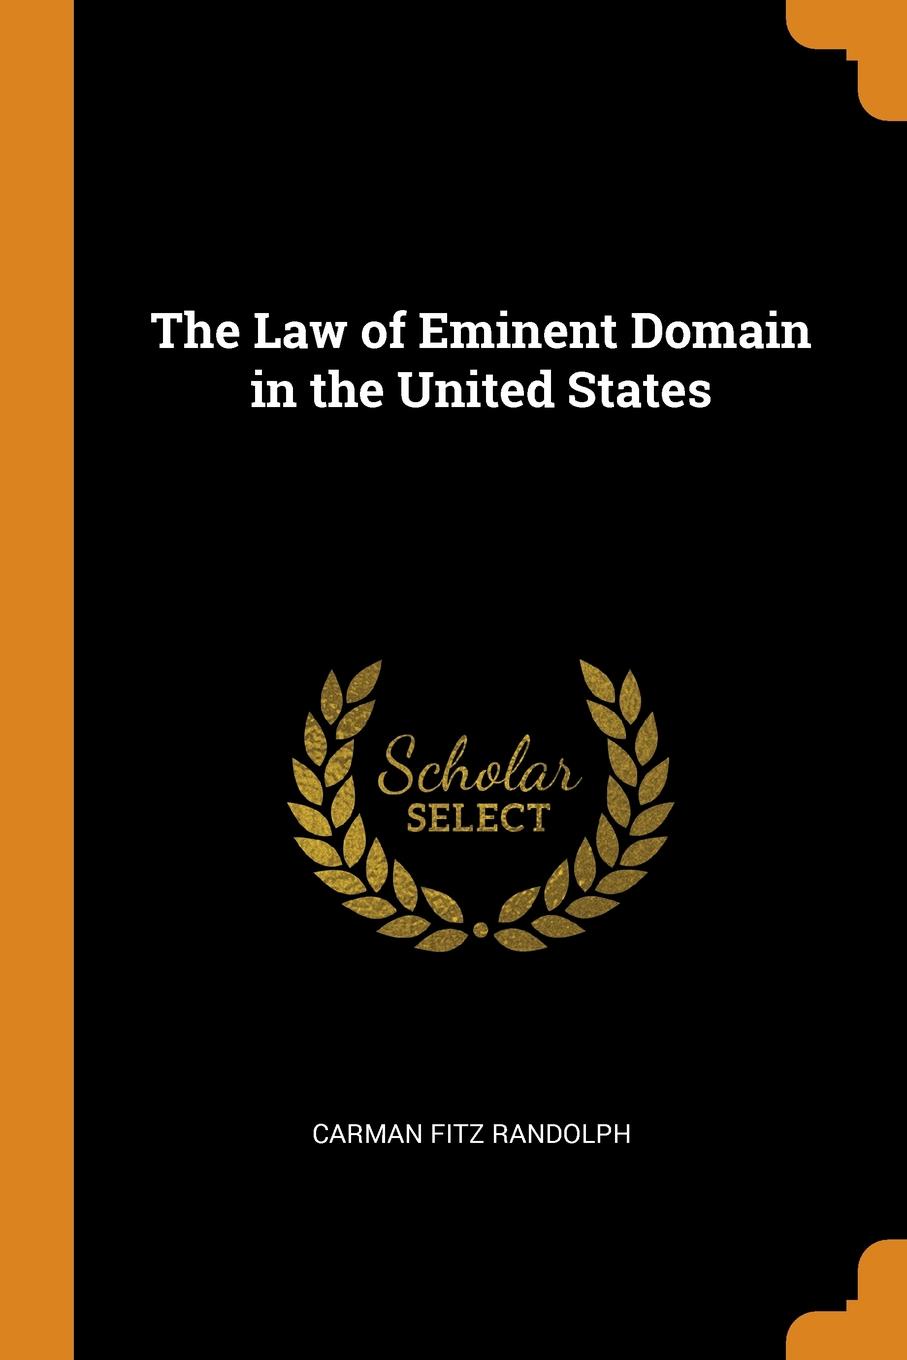 фото The Law of Eminent Domain in the United States